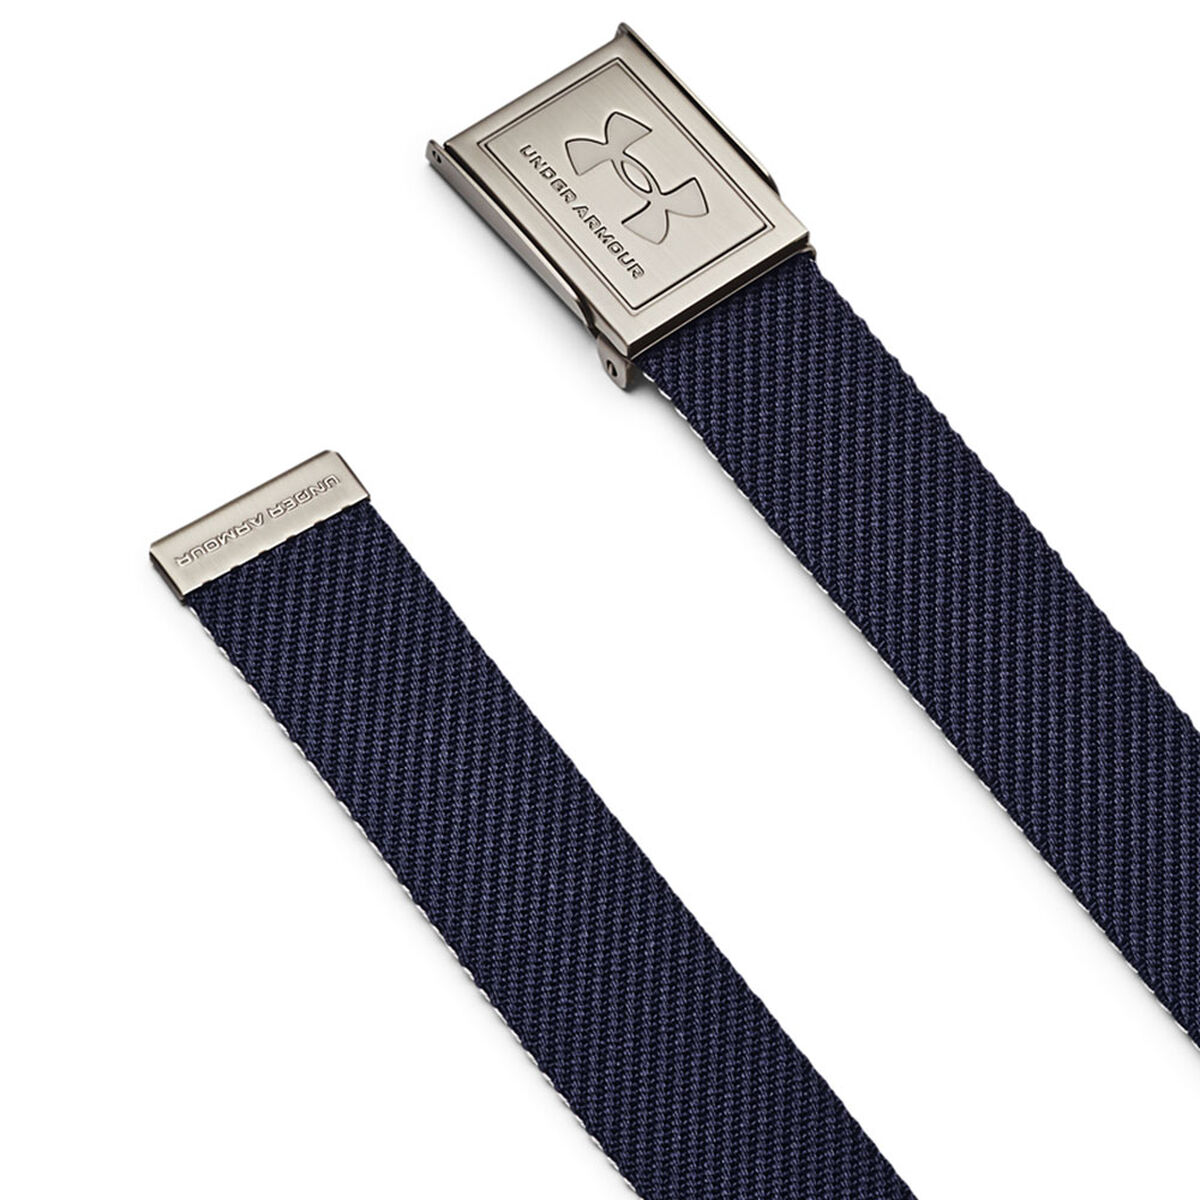 Under Armour Men’s Navy Blue, Khaki and Silver Adjustable Webbing Golf Belt | American Golf, One Size